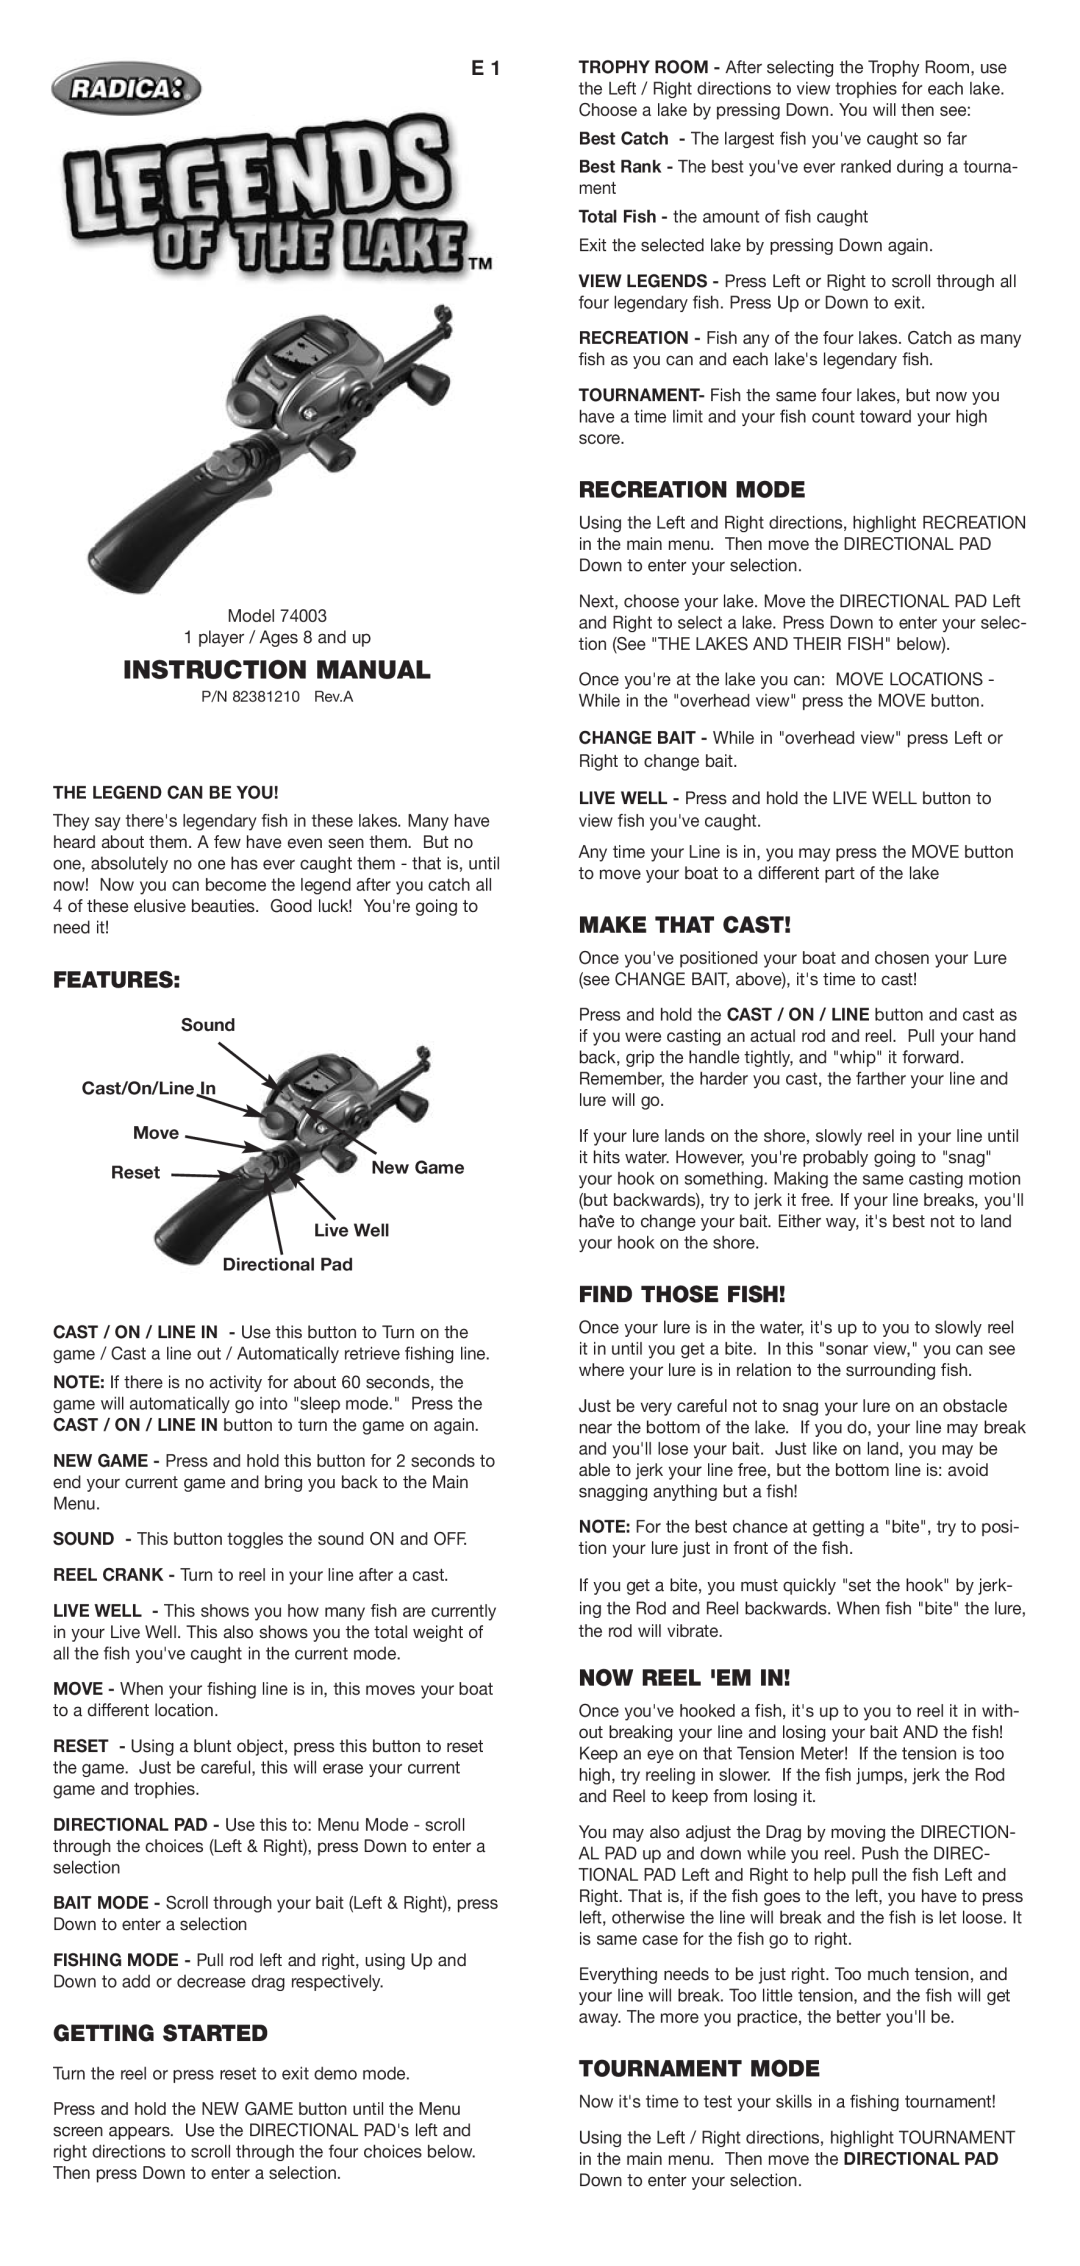 Radica Games 74003 instruction manual Features, Getting Started, Recreation Mode, Make That Cast, Find Those Fish, Sound 